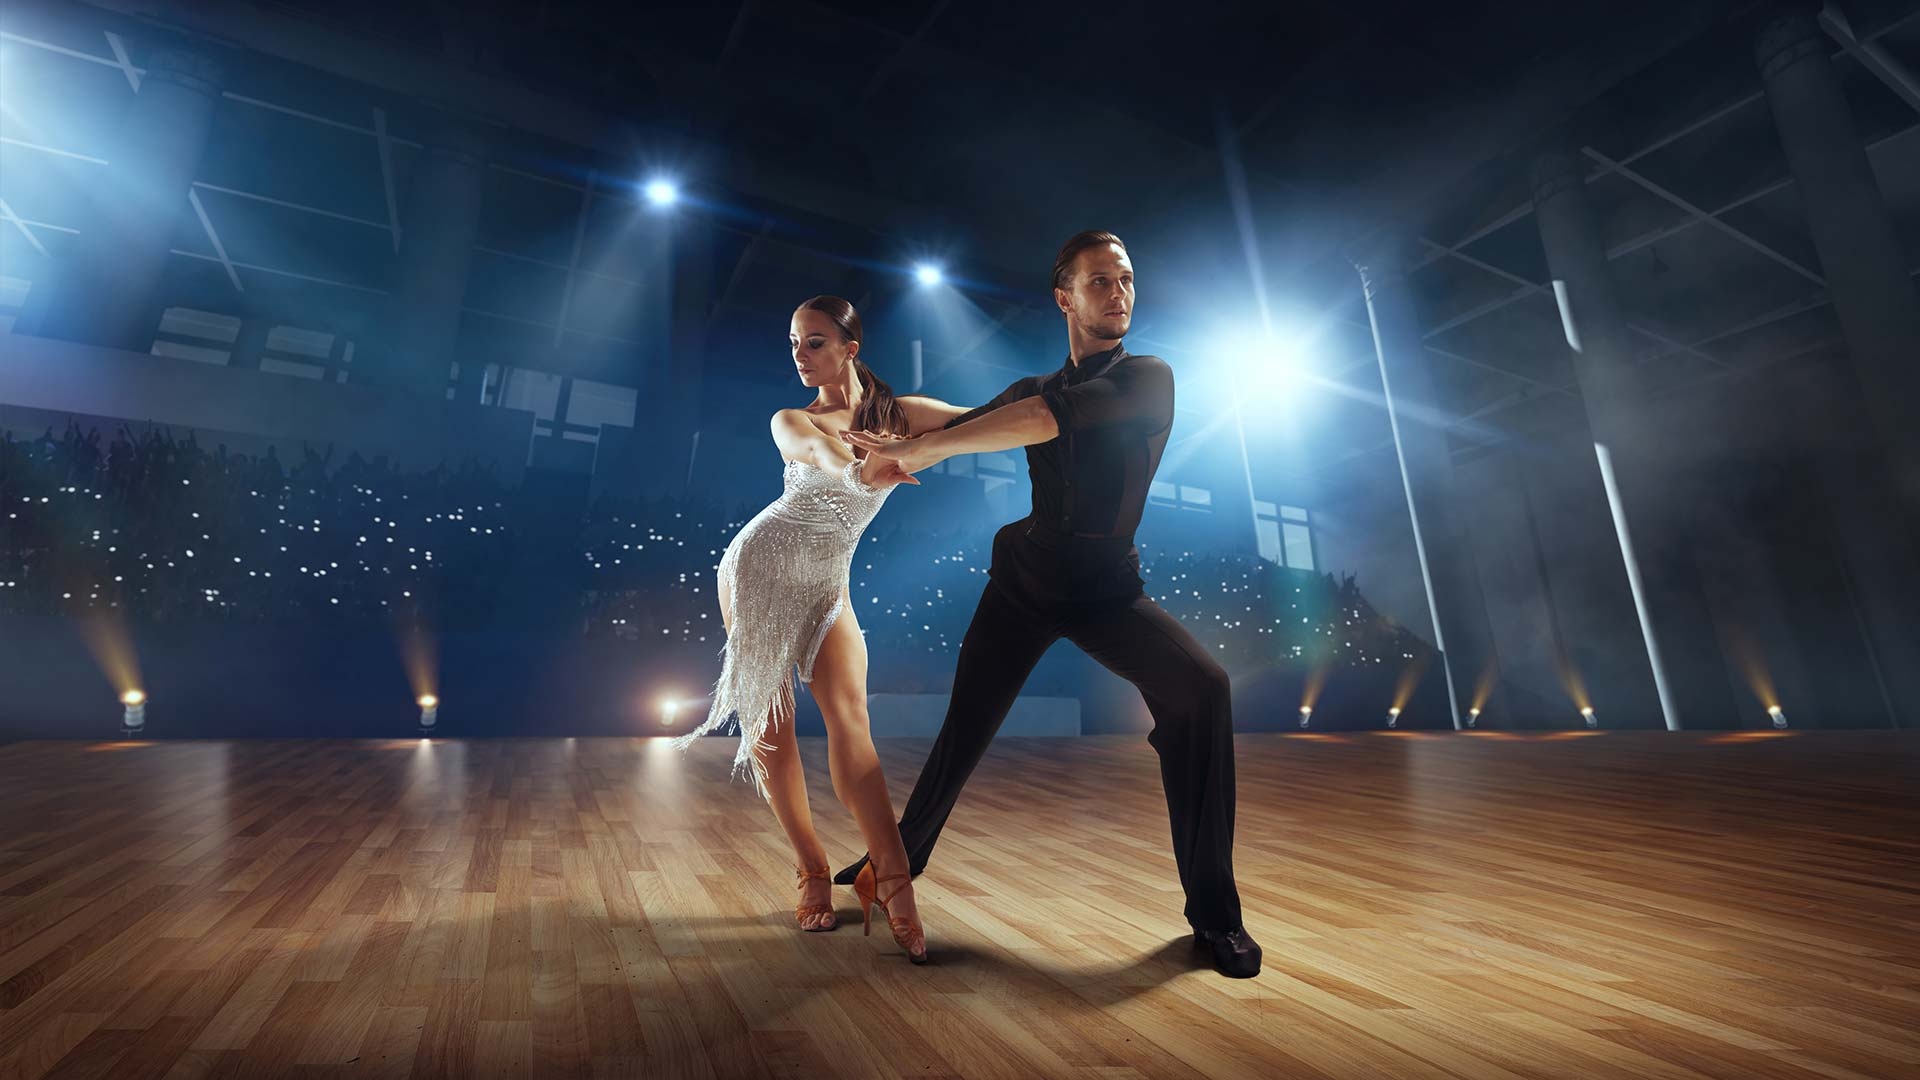 Mambo Dance: The international dancesport competition, Invariably passionate rhythms. 1920x1080 Full HD Wallpaper.